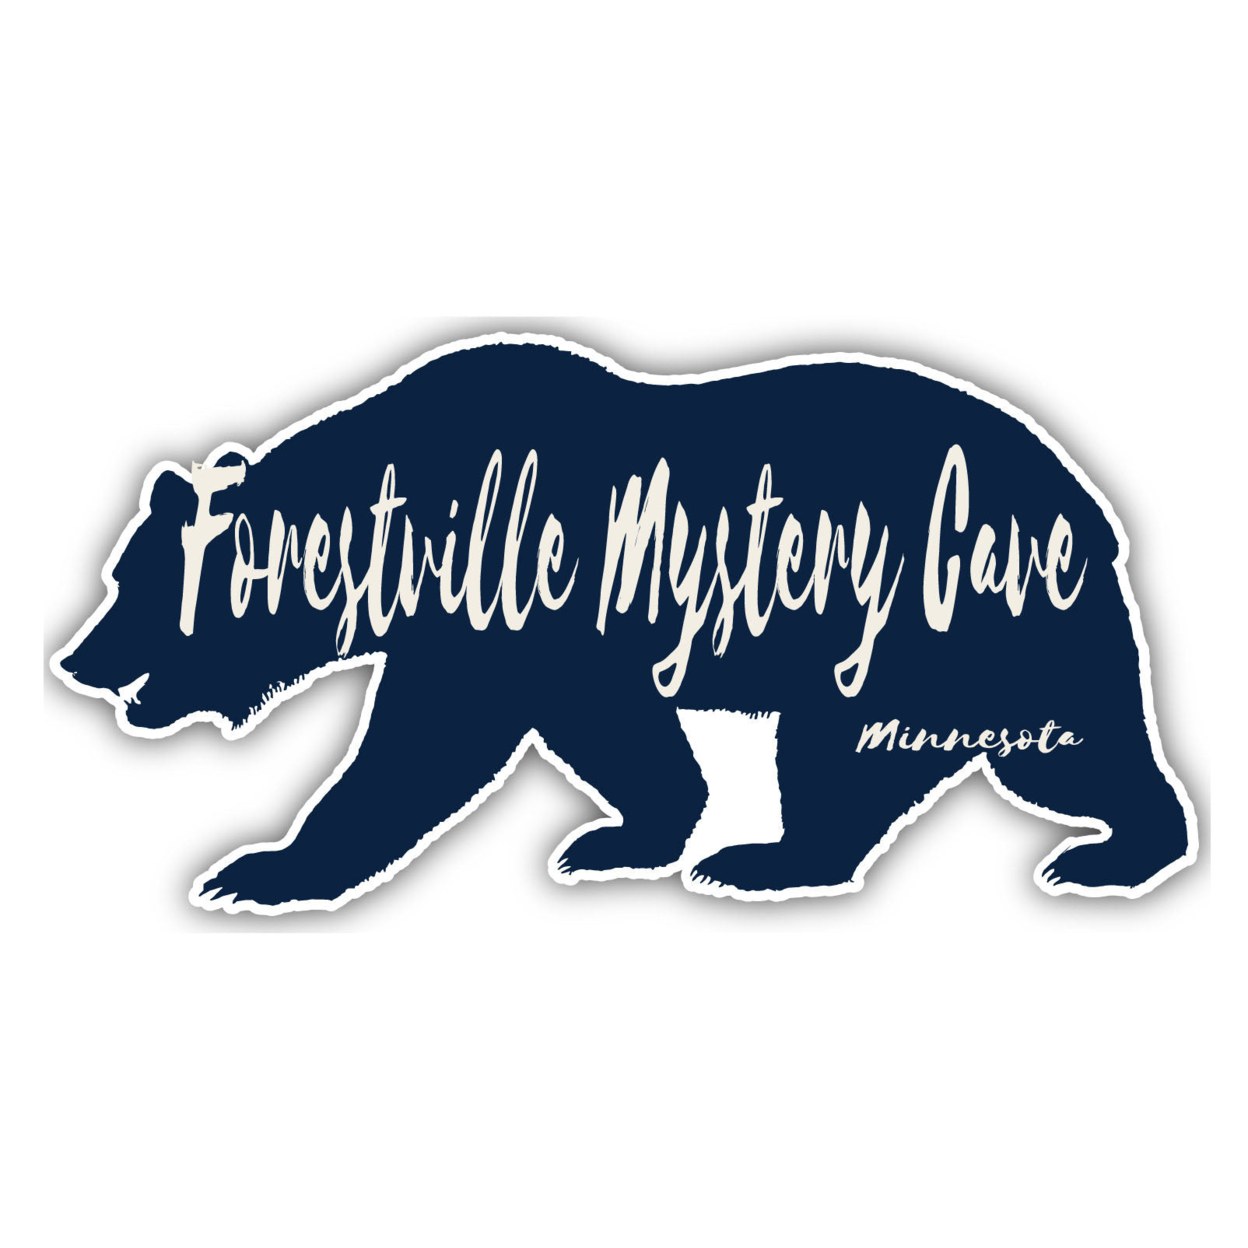 Forestville Mystery Cave Minnesota Souvenir Decorative Stickers (Choose Theme And Size) - 4-Pack, 6-Inch, Bear